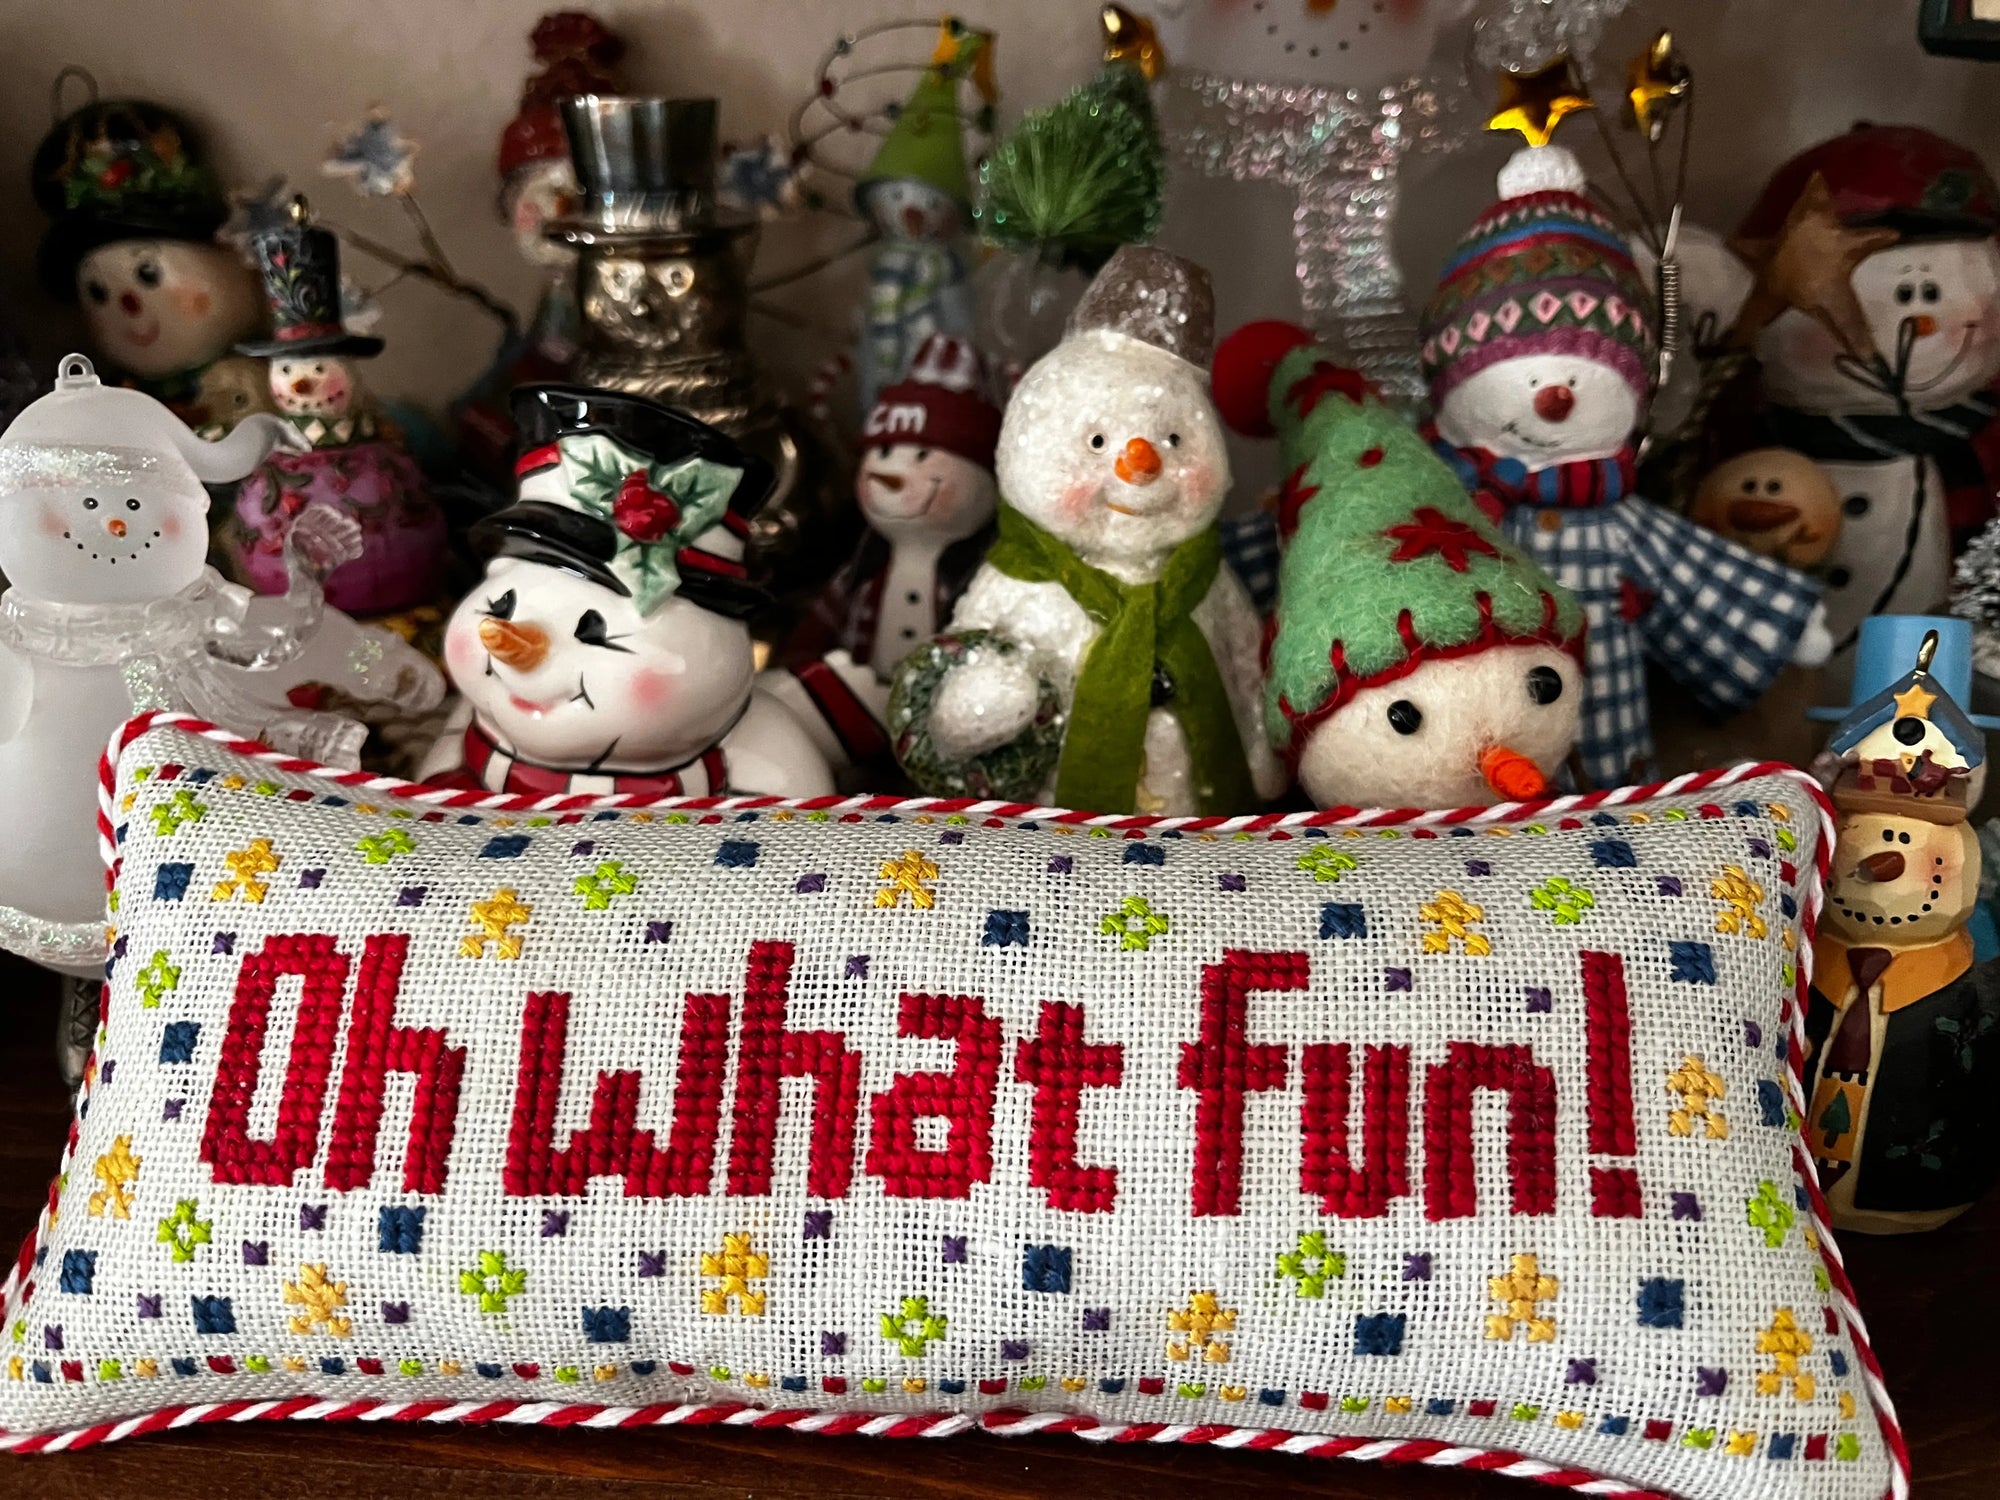 Celebration: Oh What Fun! by Colorado Cross Stitcher Colorado Cross Stitcher